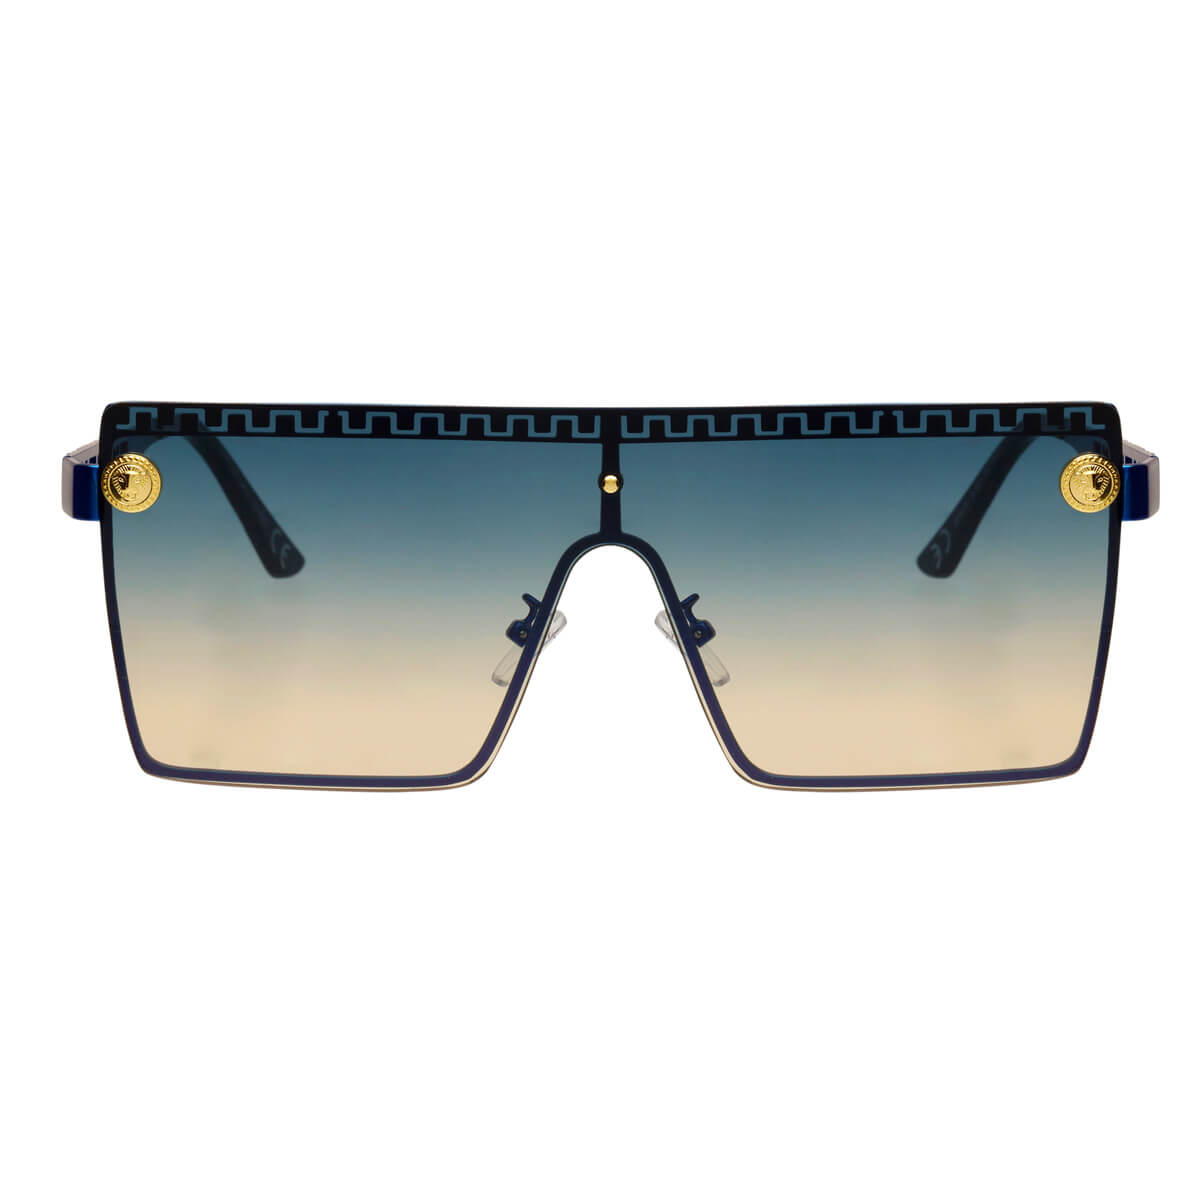 Patterned sunglasses with decoration